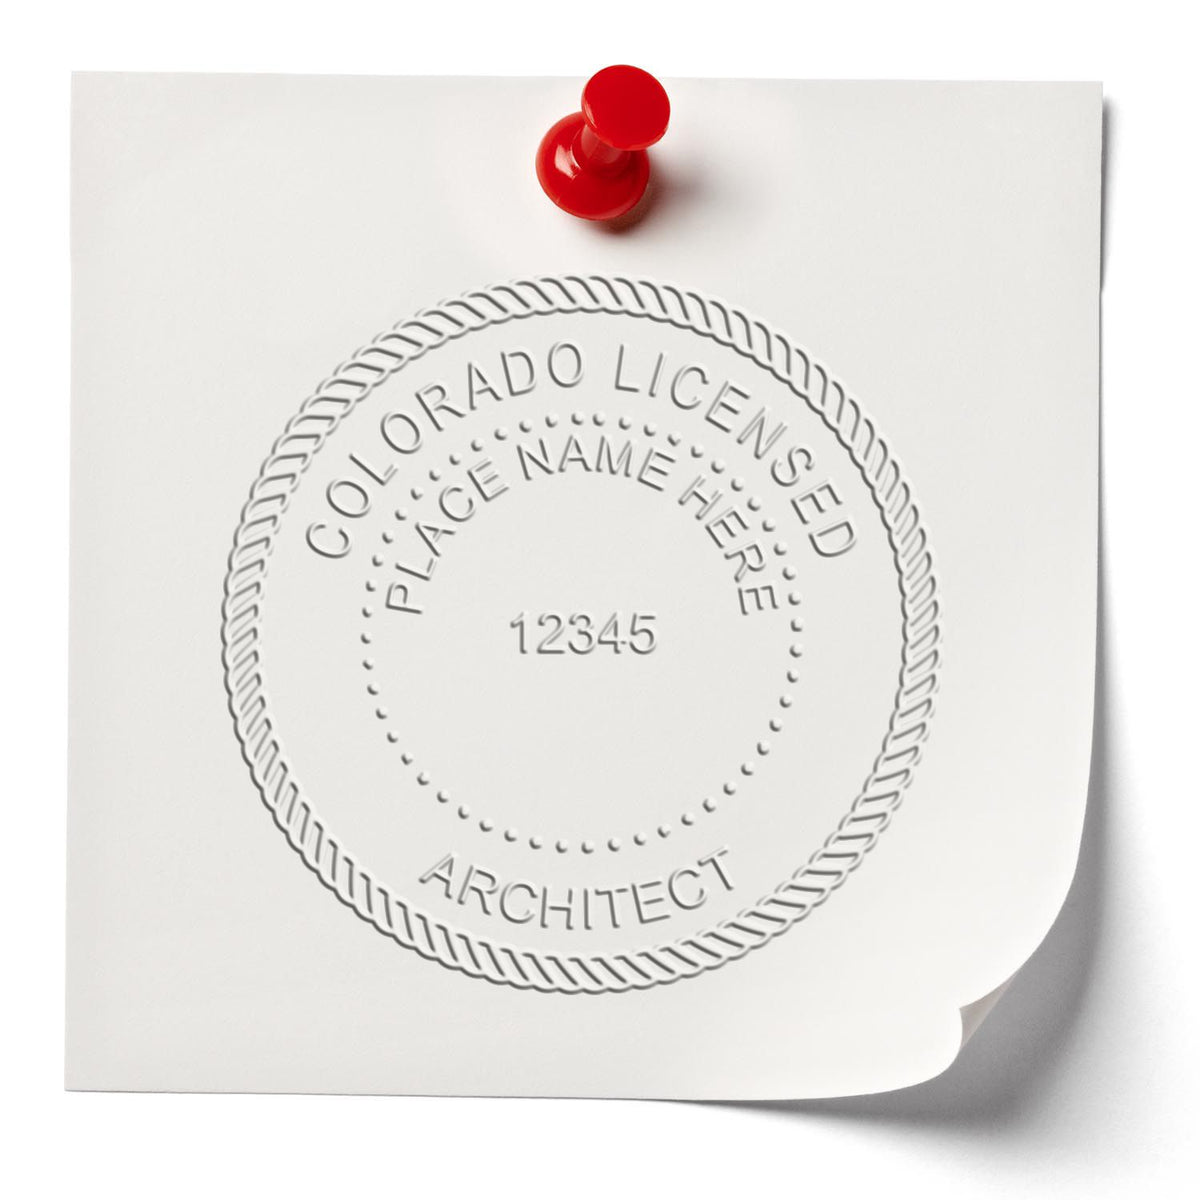 A lifestyle photo showing a stamped image of the Colorado Desk Architect Embossing Seal on a piece of paper